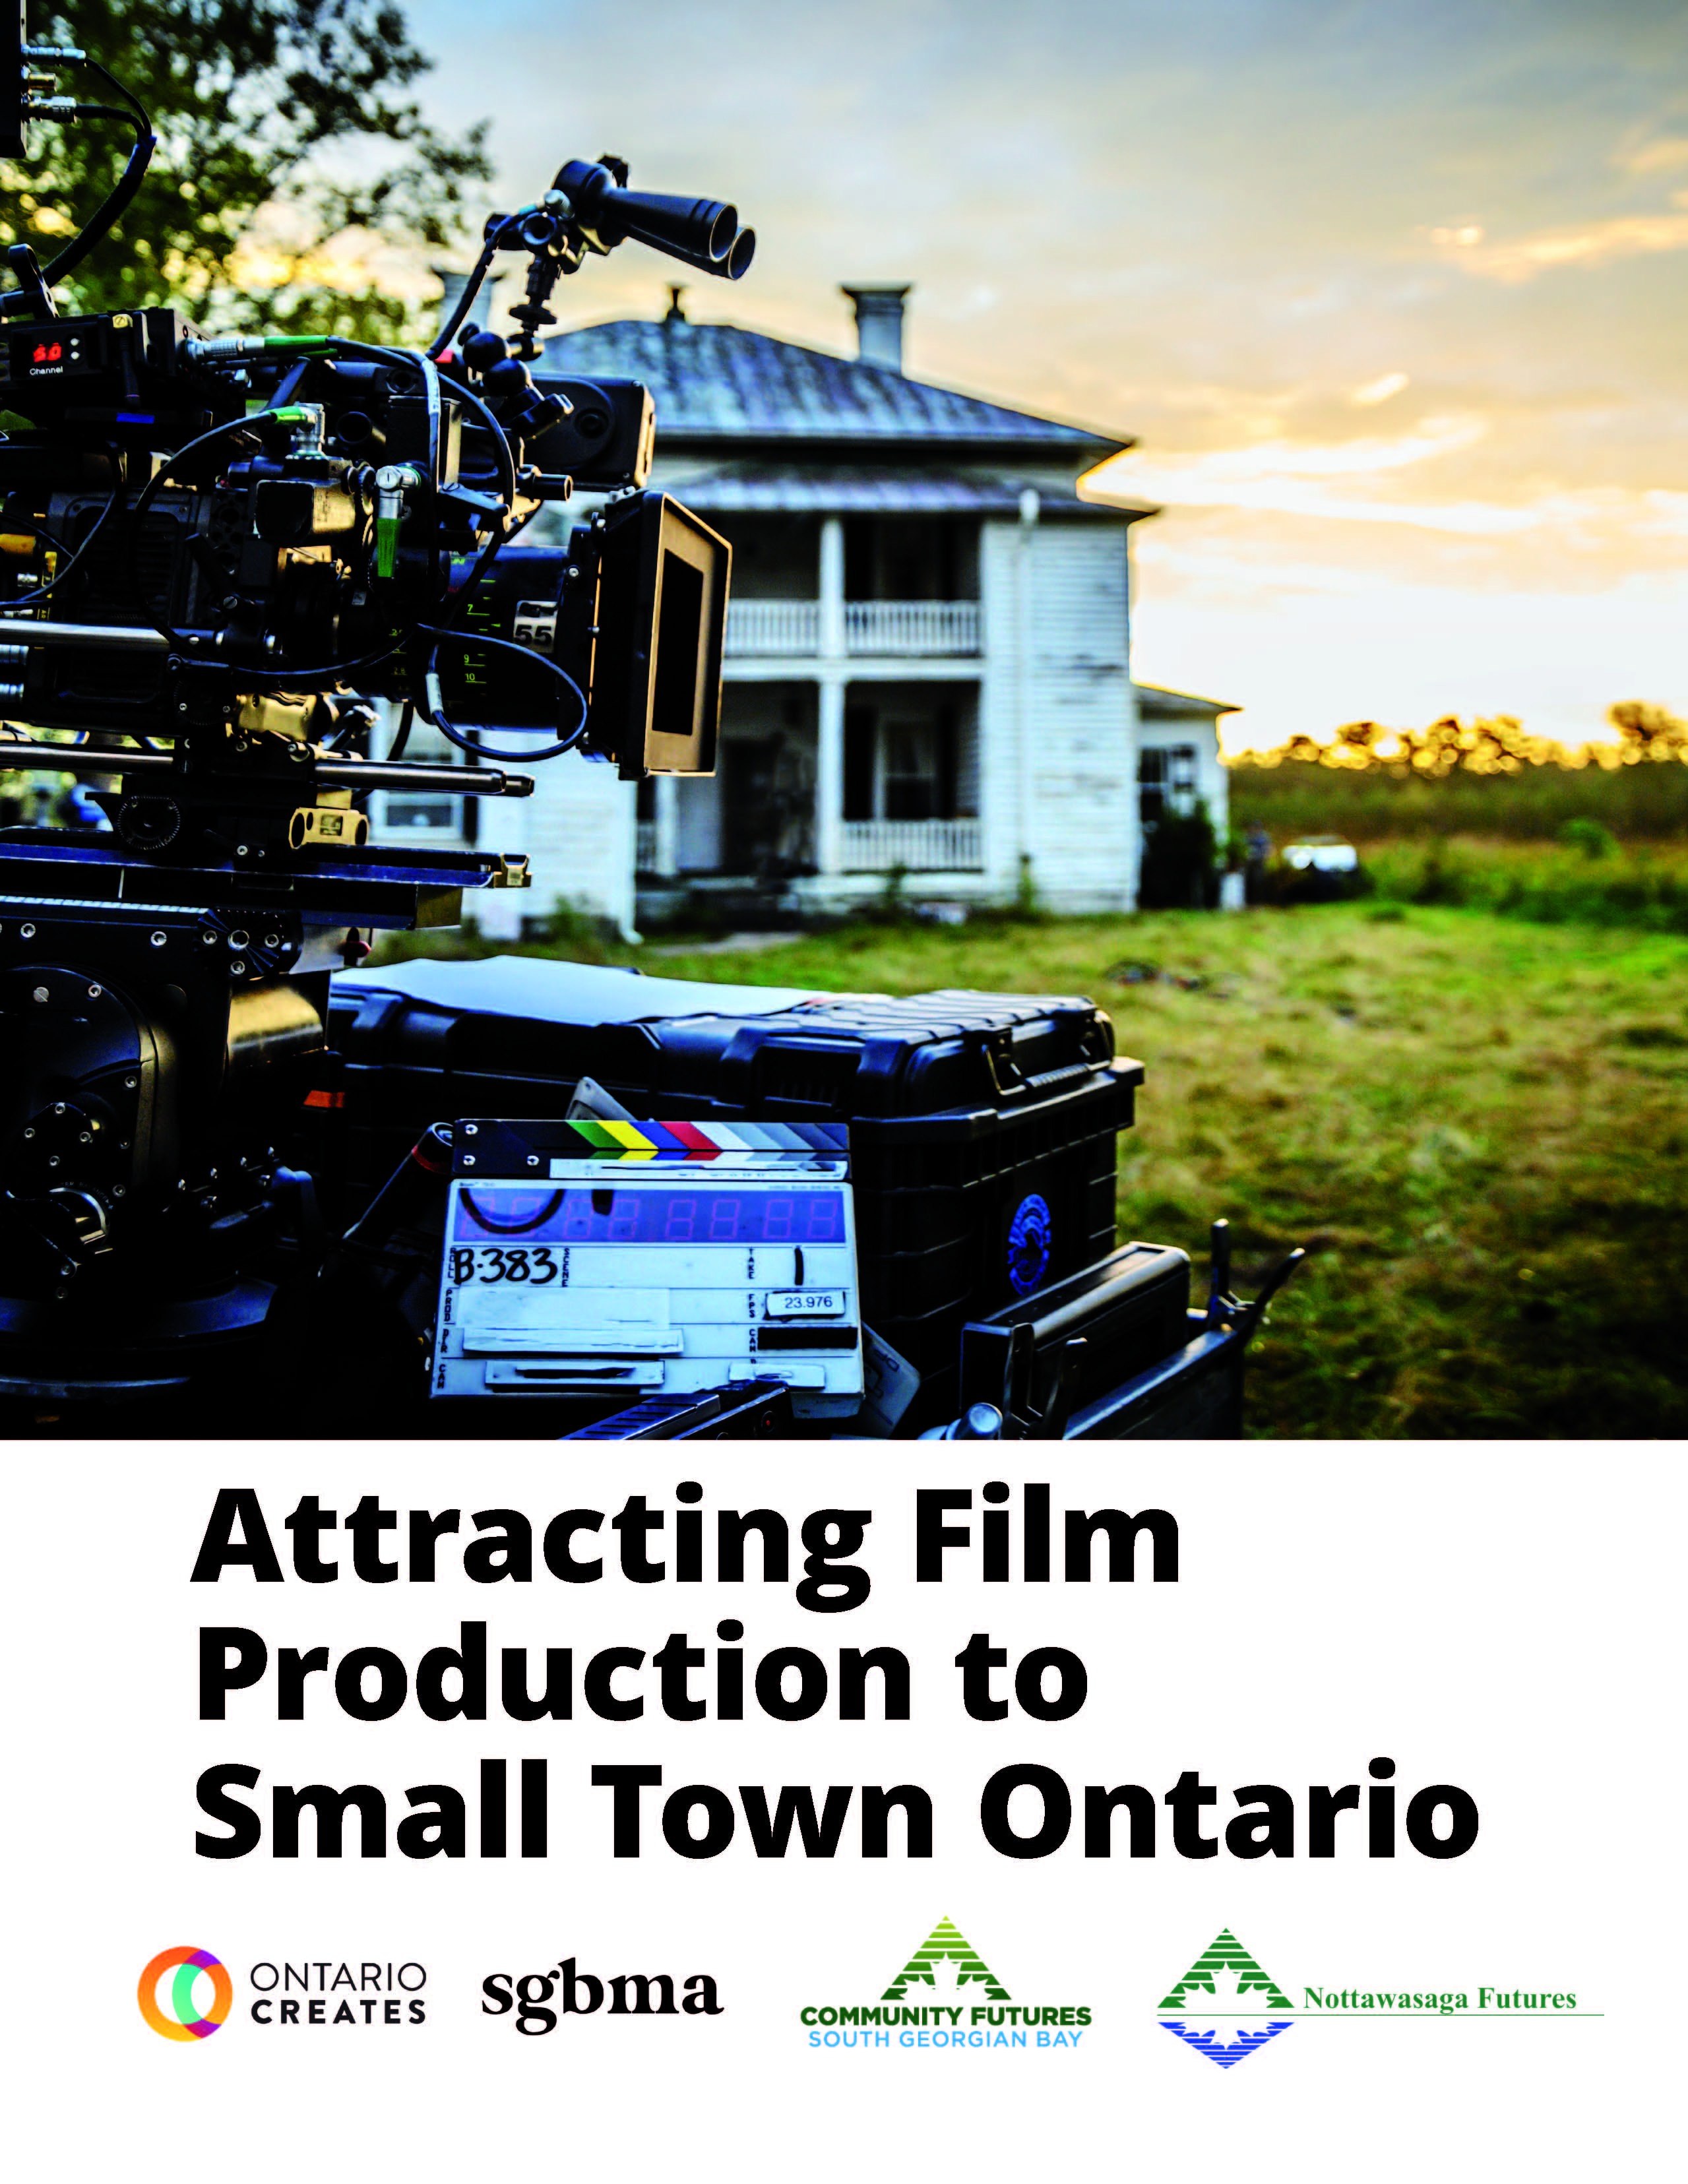 Attracting Film Productions to Small Town Ontario